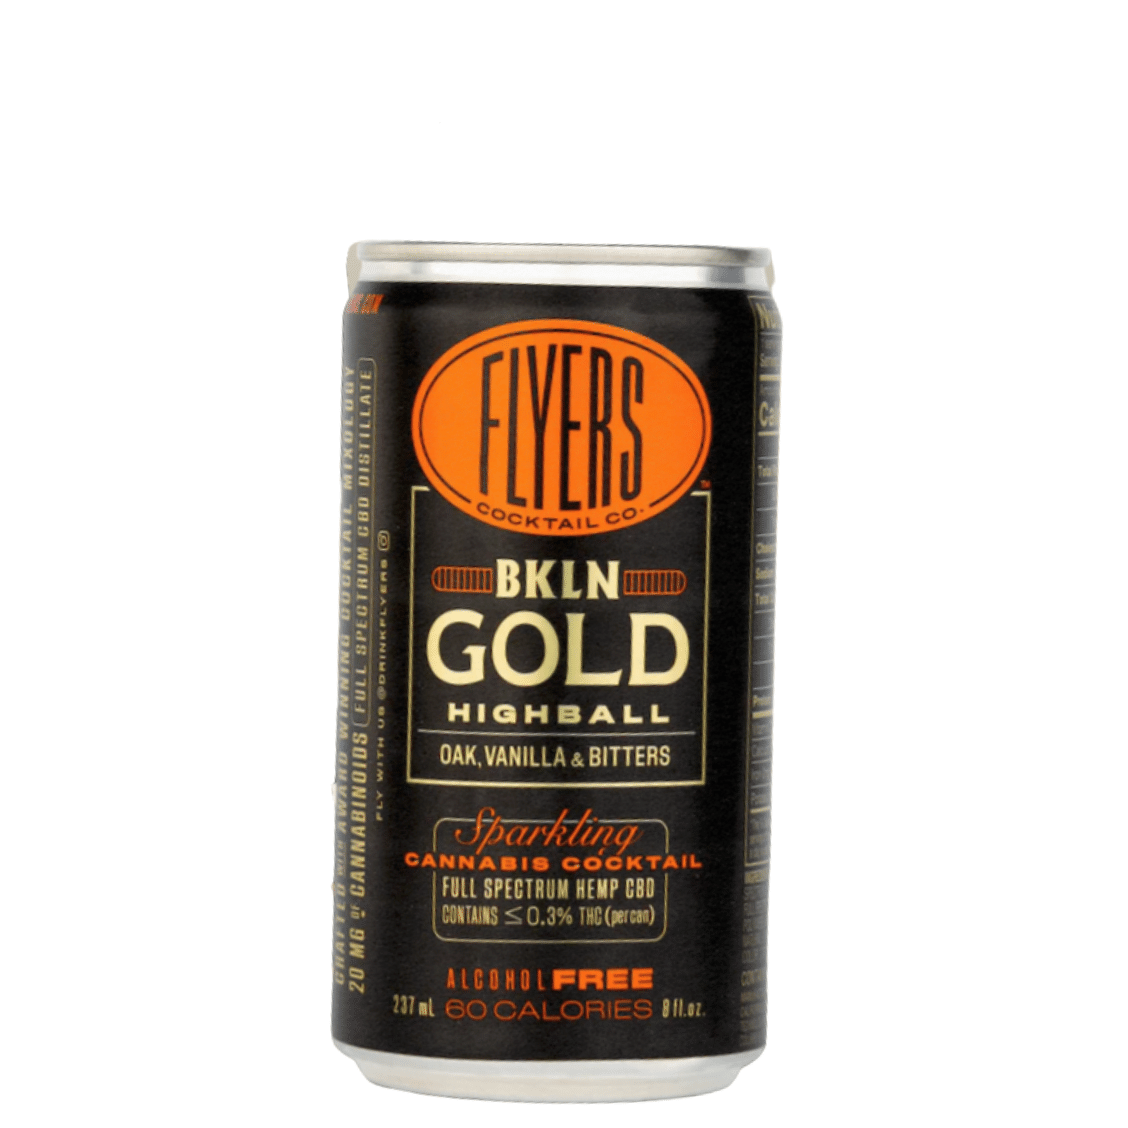 Flyers BLKN Gold - 4 pack Sparkling Cannabis Cocktail single